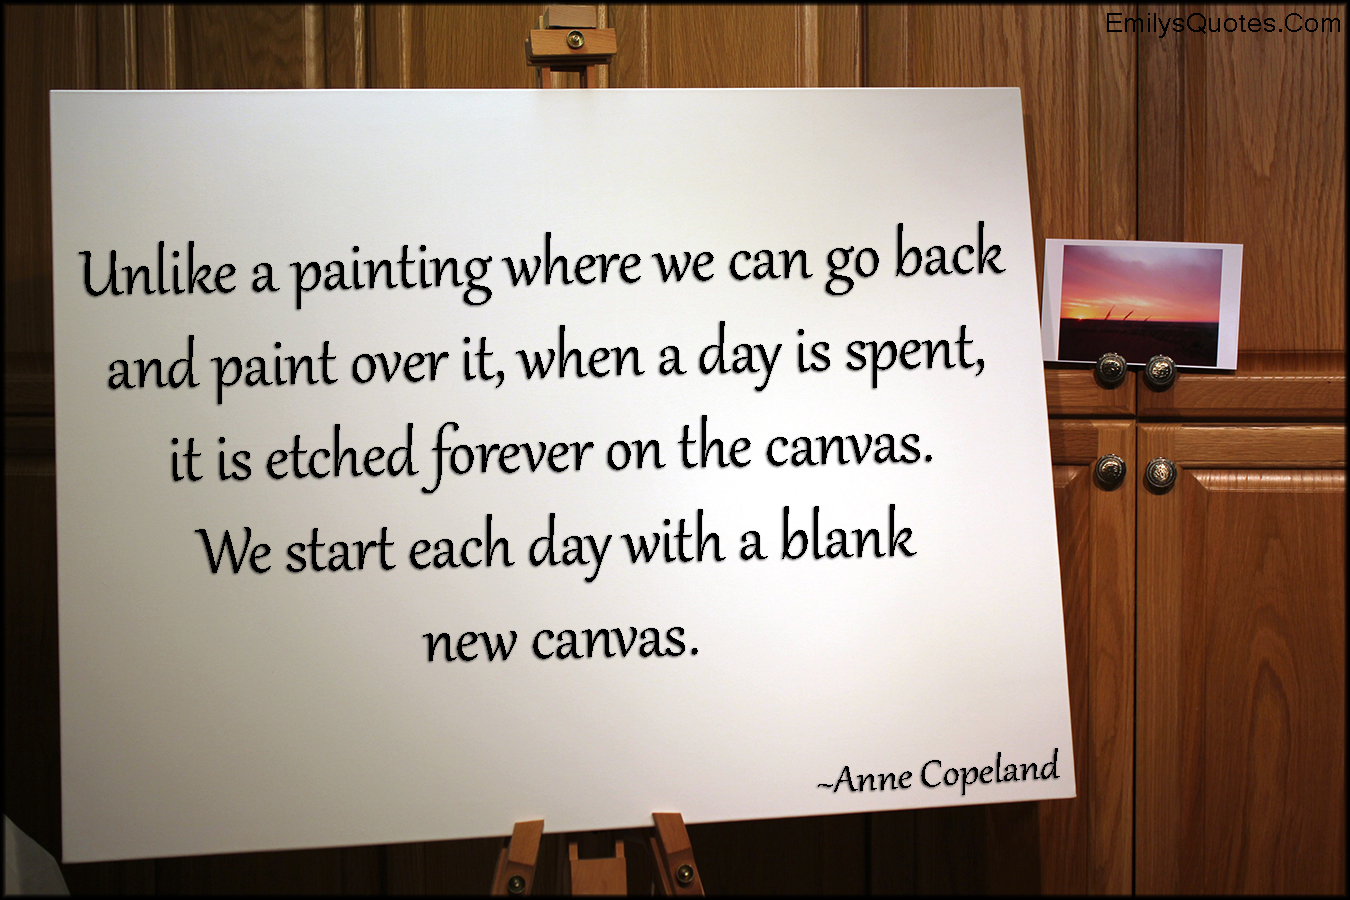 Unlike a painting where we can go back and paint over it, when a day is spent, it is etched forever on the canvas. We start each day with a blank new canvas